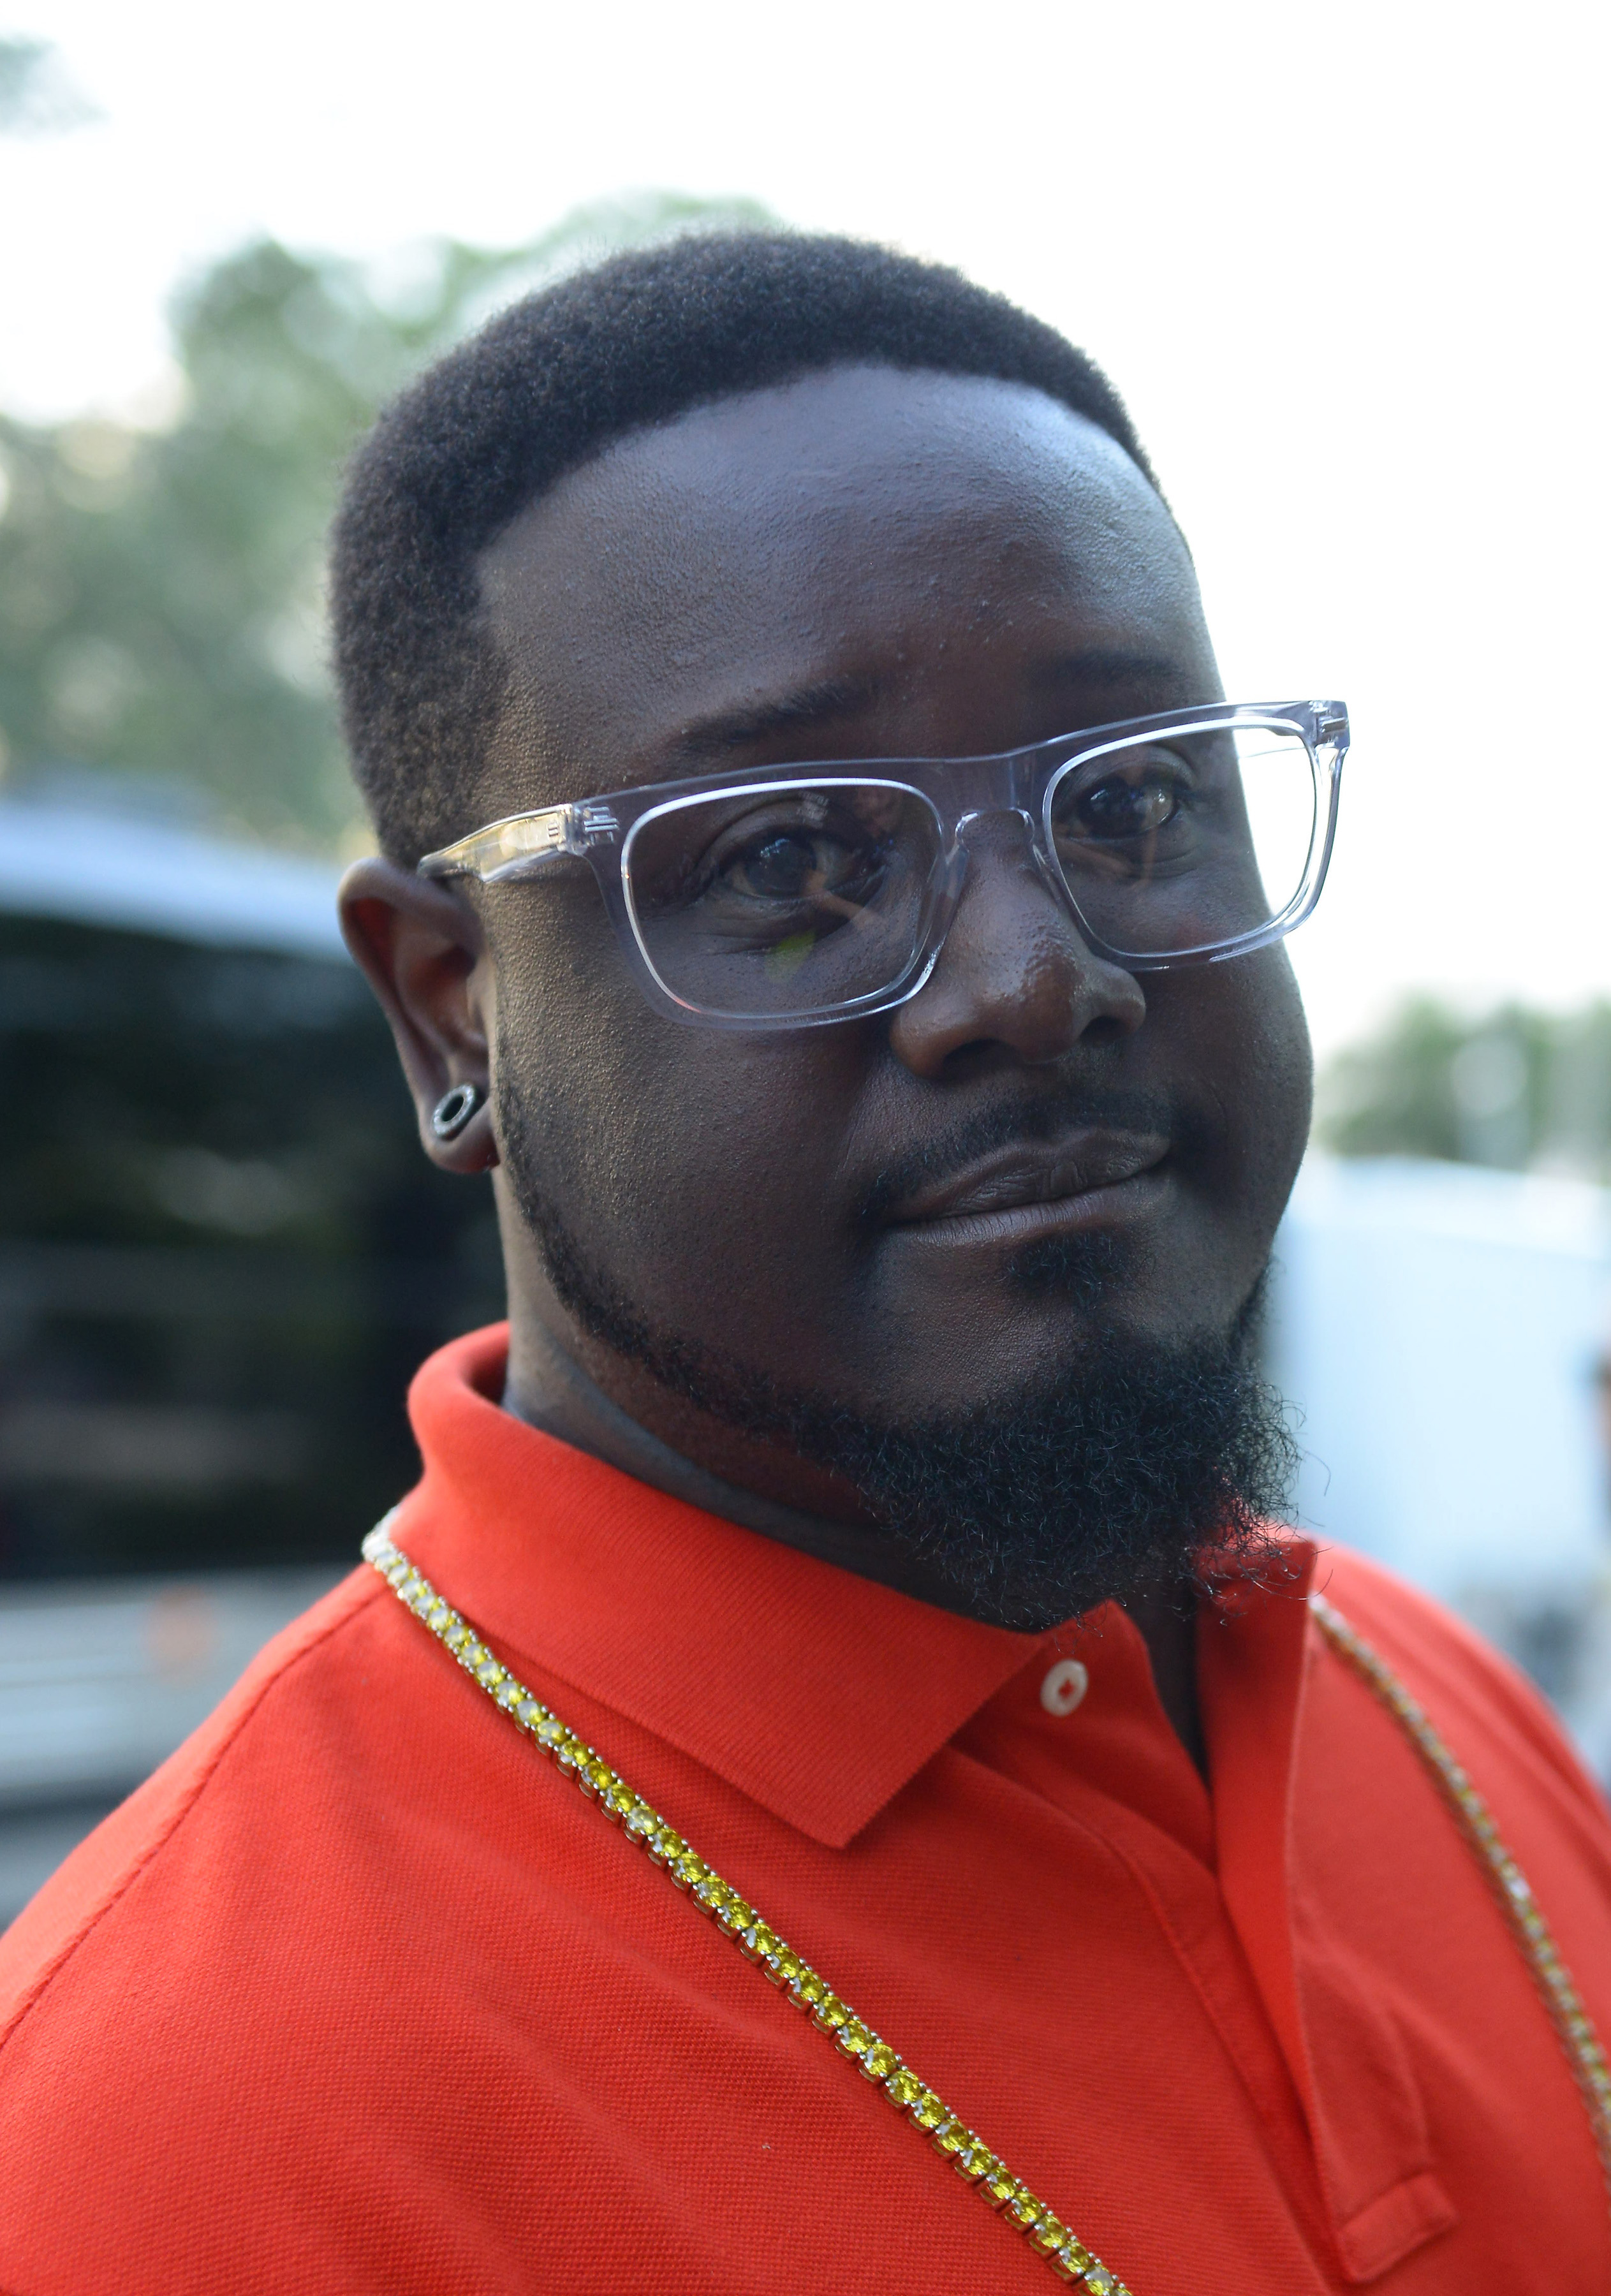 T-Pain backstage before performing during the 'Drankin Patna Tour' with support from Bando Jonez and Snootie Wild at Revolution on Aug. 12, 2014 in Fort Lauderdale, Florida.